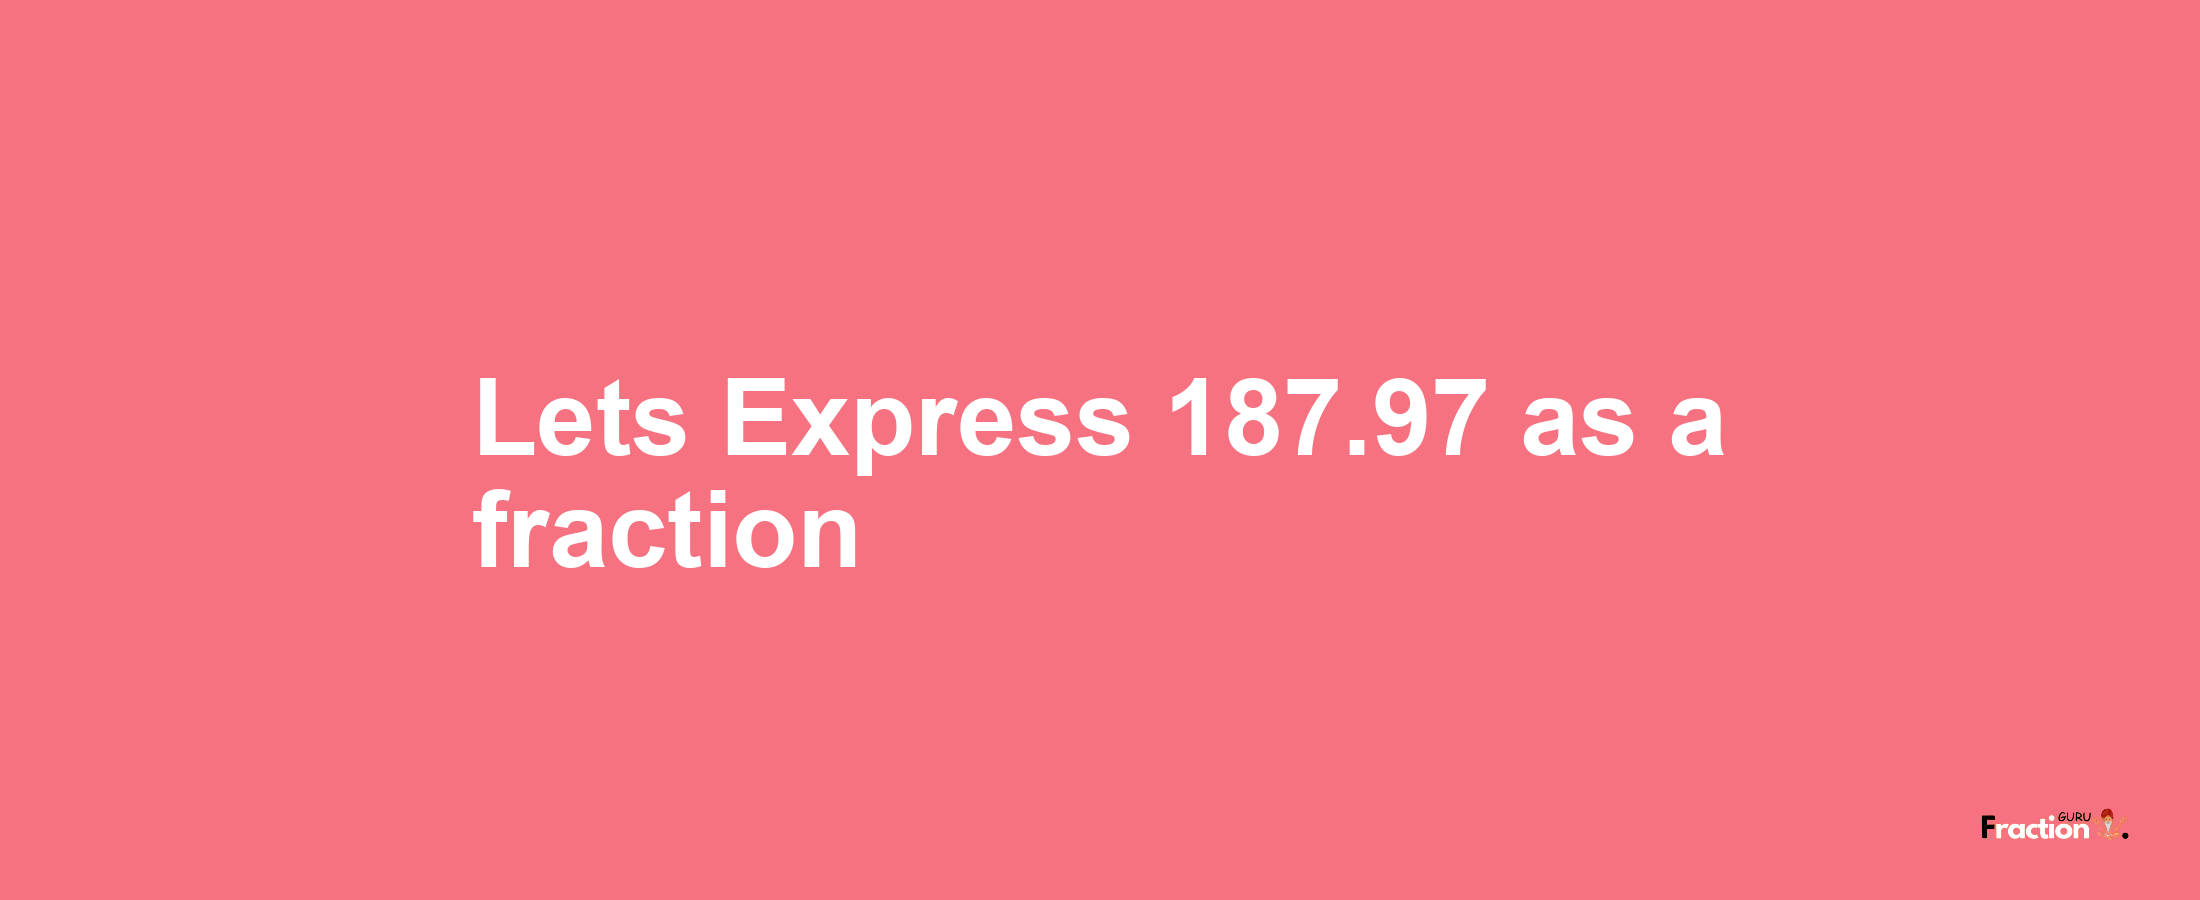 Lets Express 187.97 as afraction